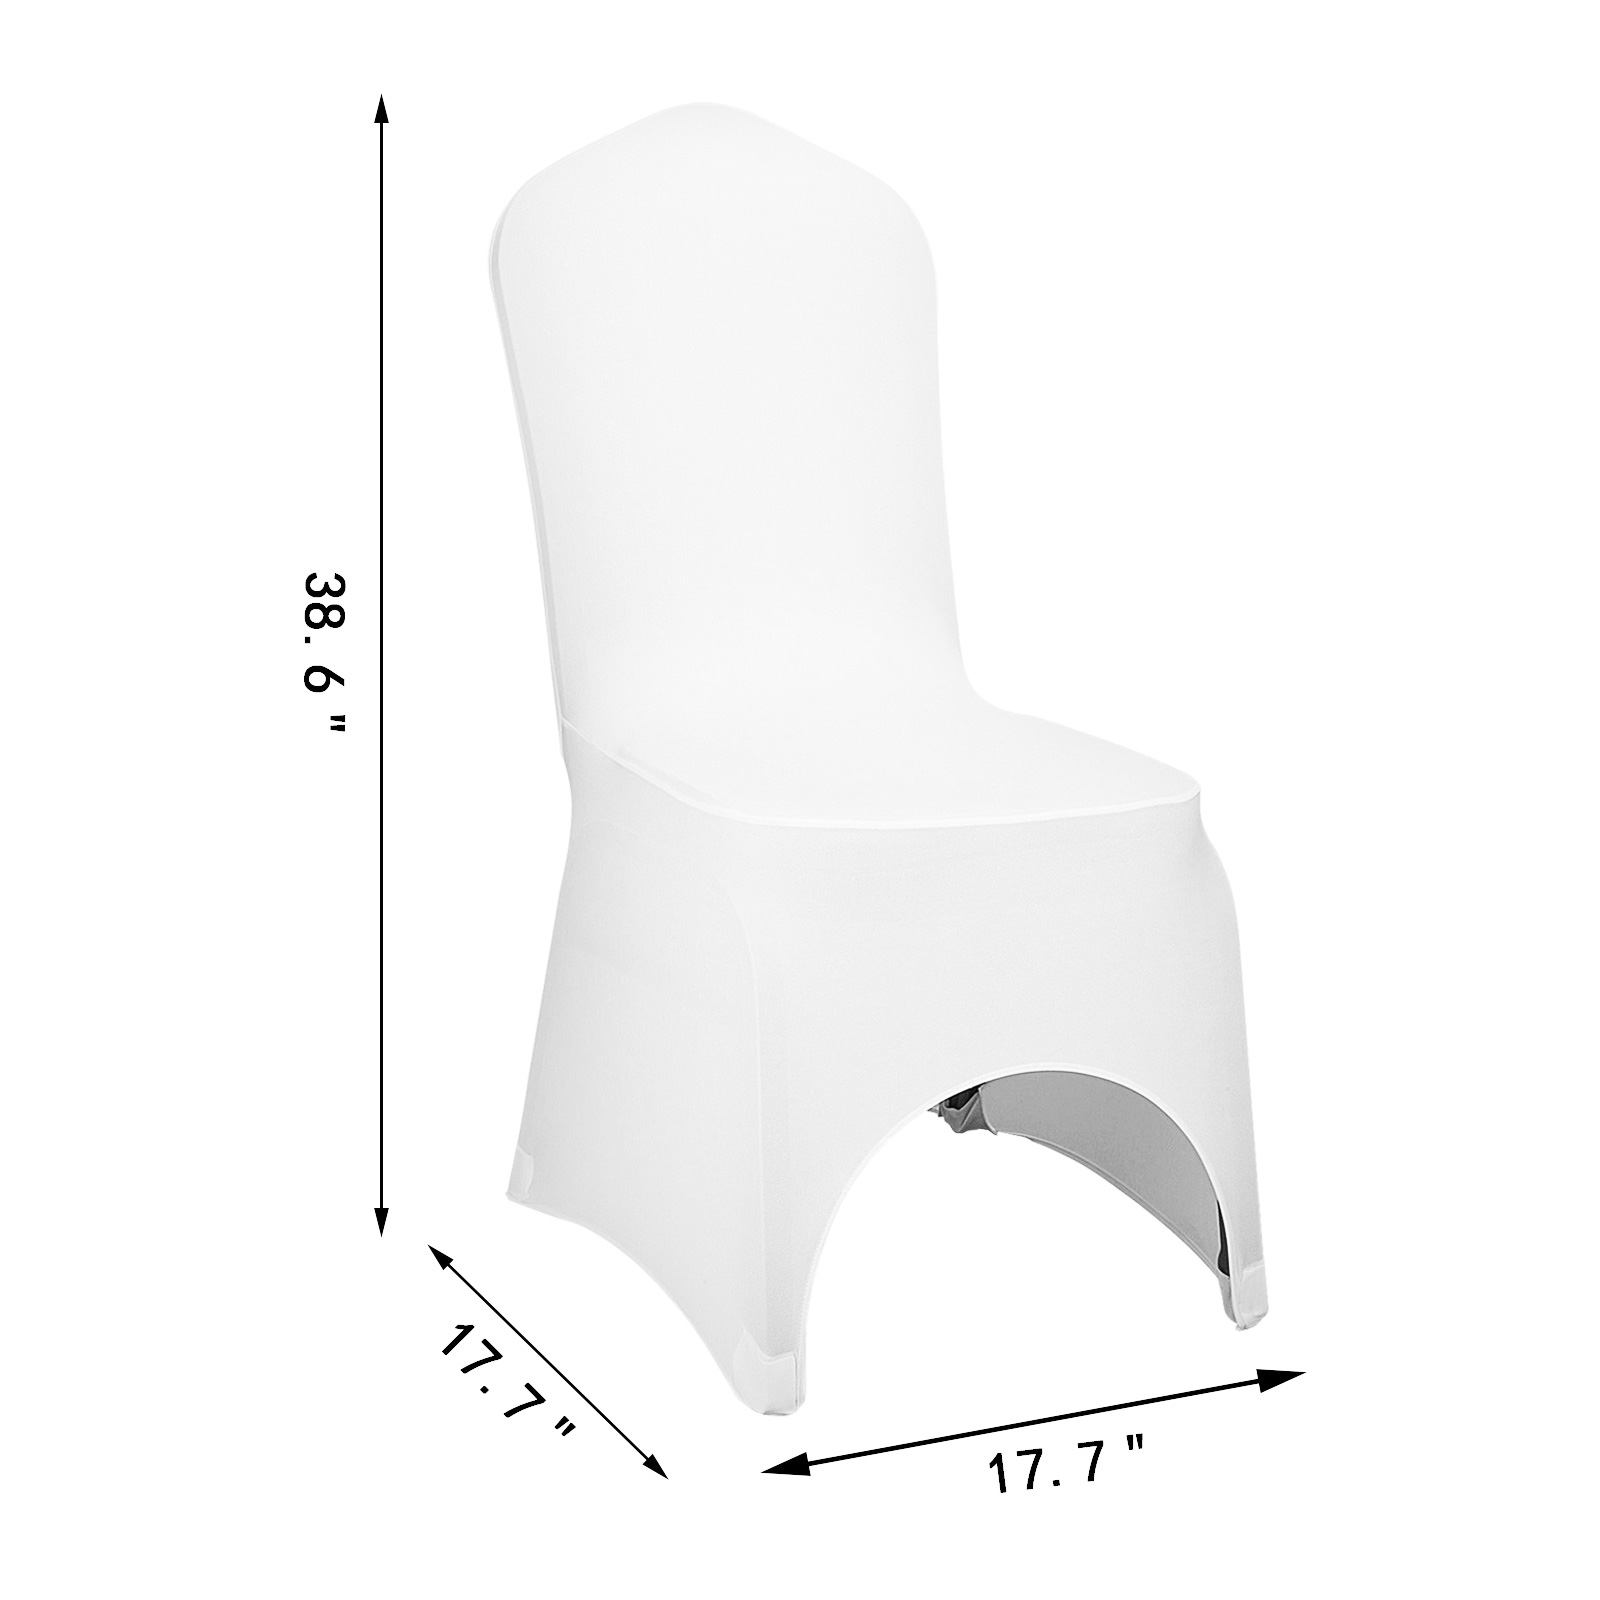 Universal 50/100 pcs Polyester Spandex Wedding Chair Covers Arched Front White 